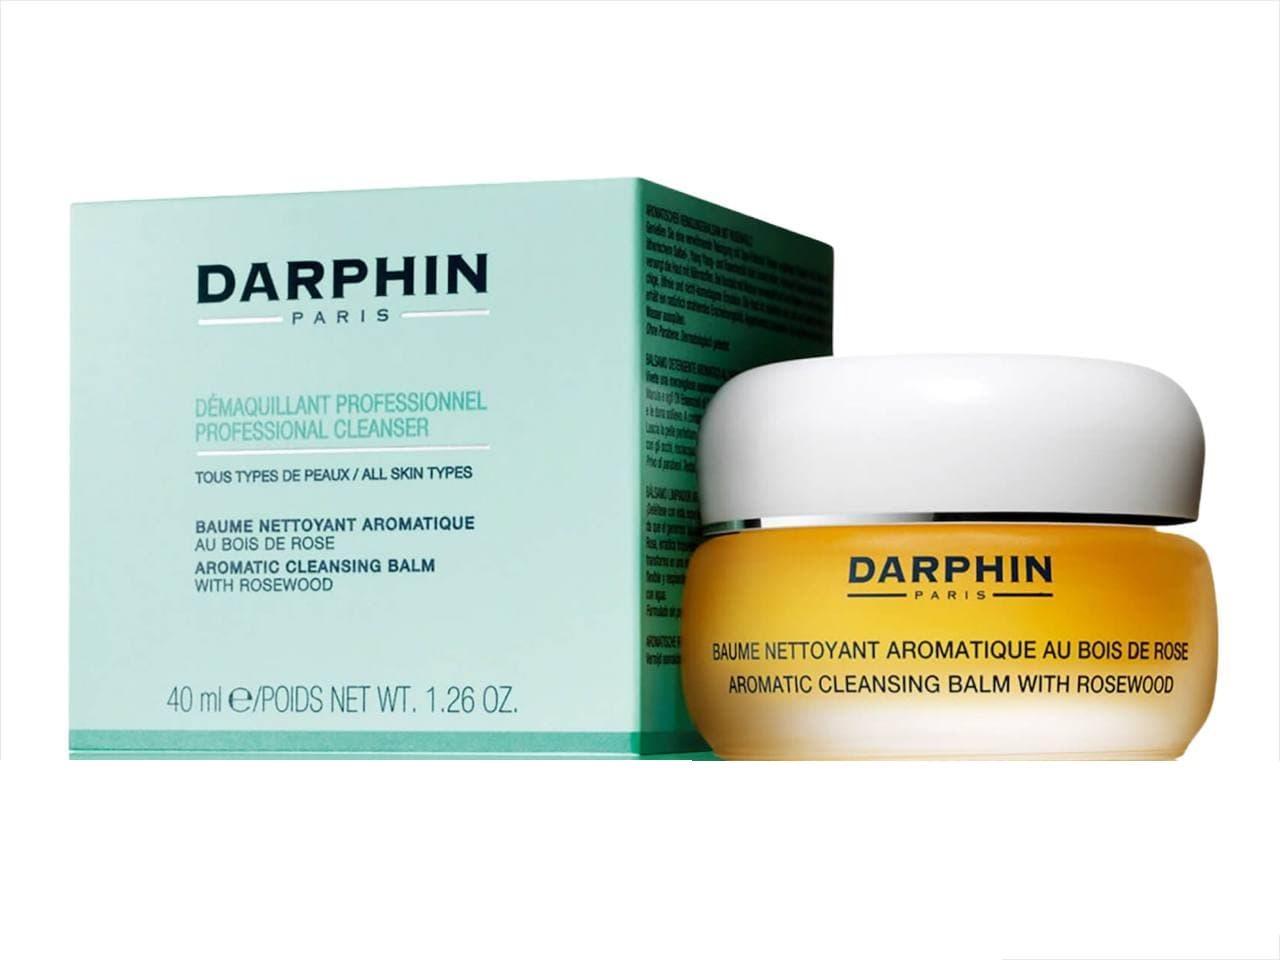 Darphin Aromatic Cleansing Balm with Rosewood Почистващ балсам за лице с етерични масла